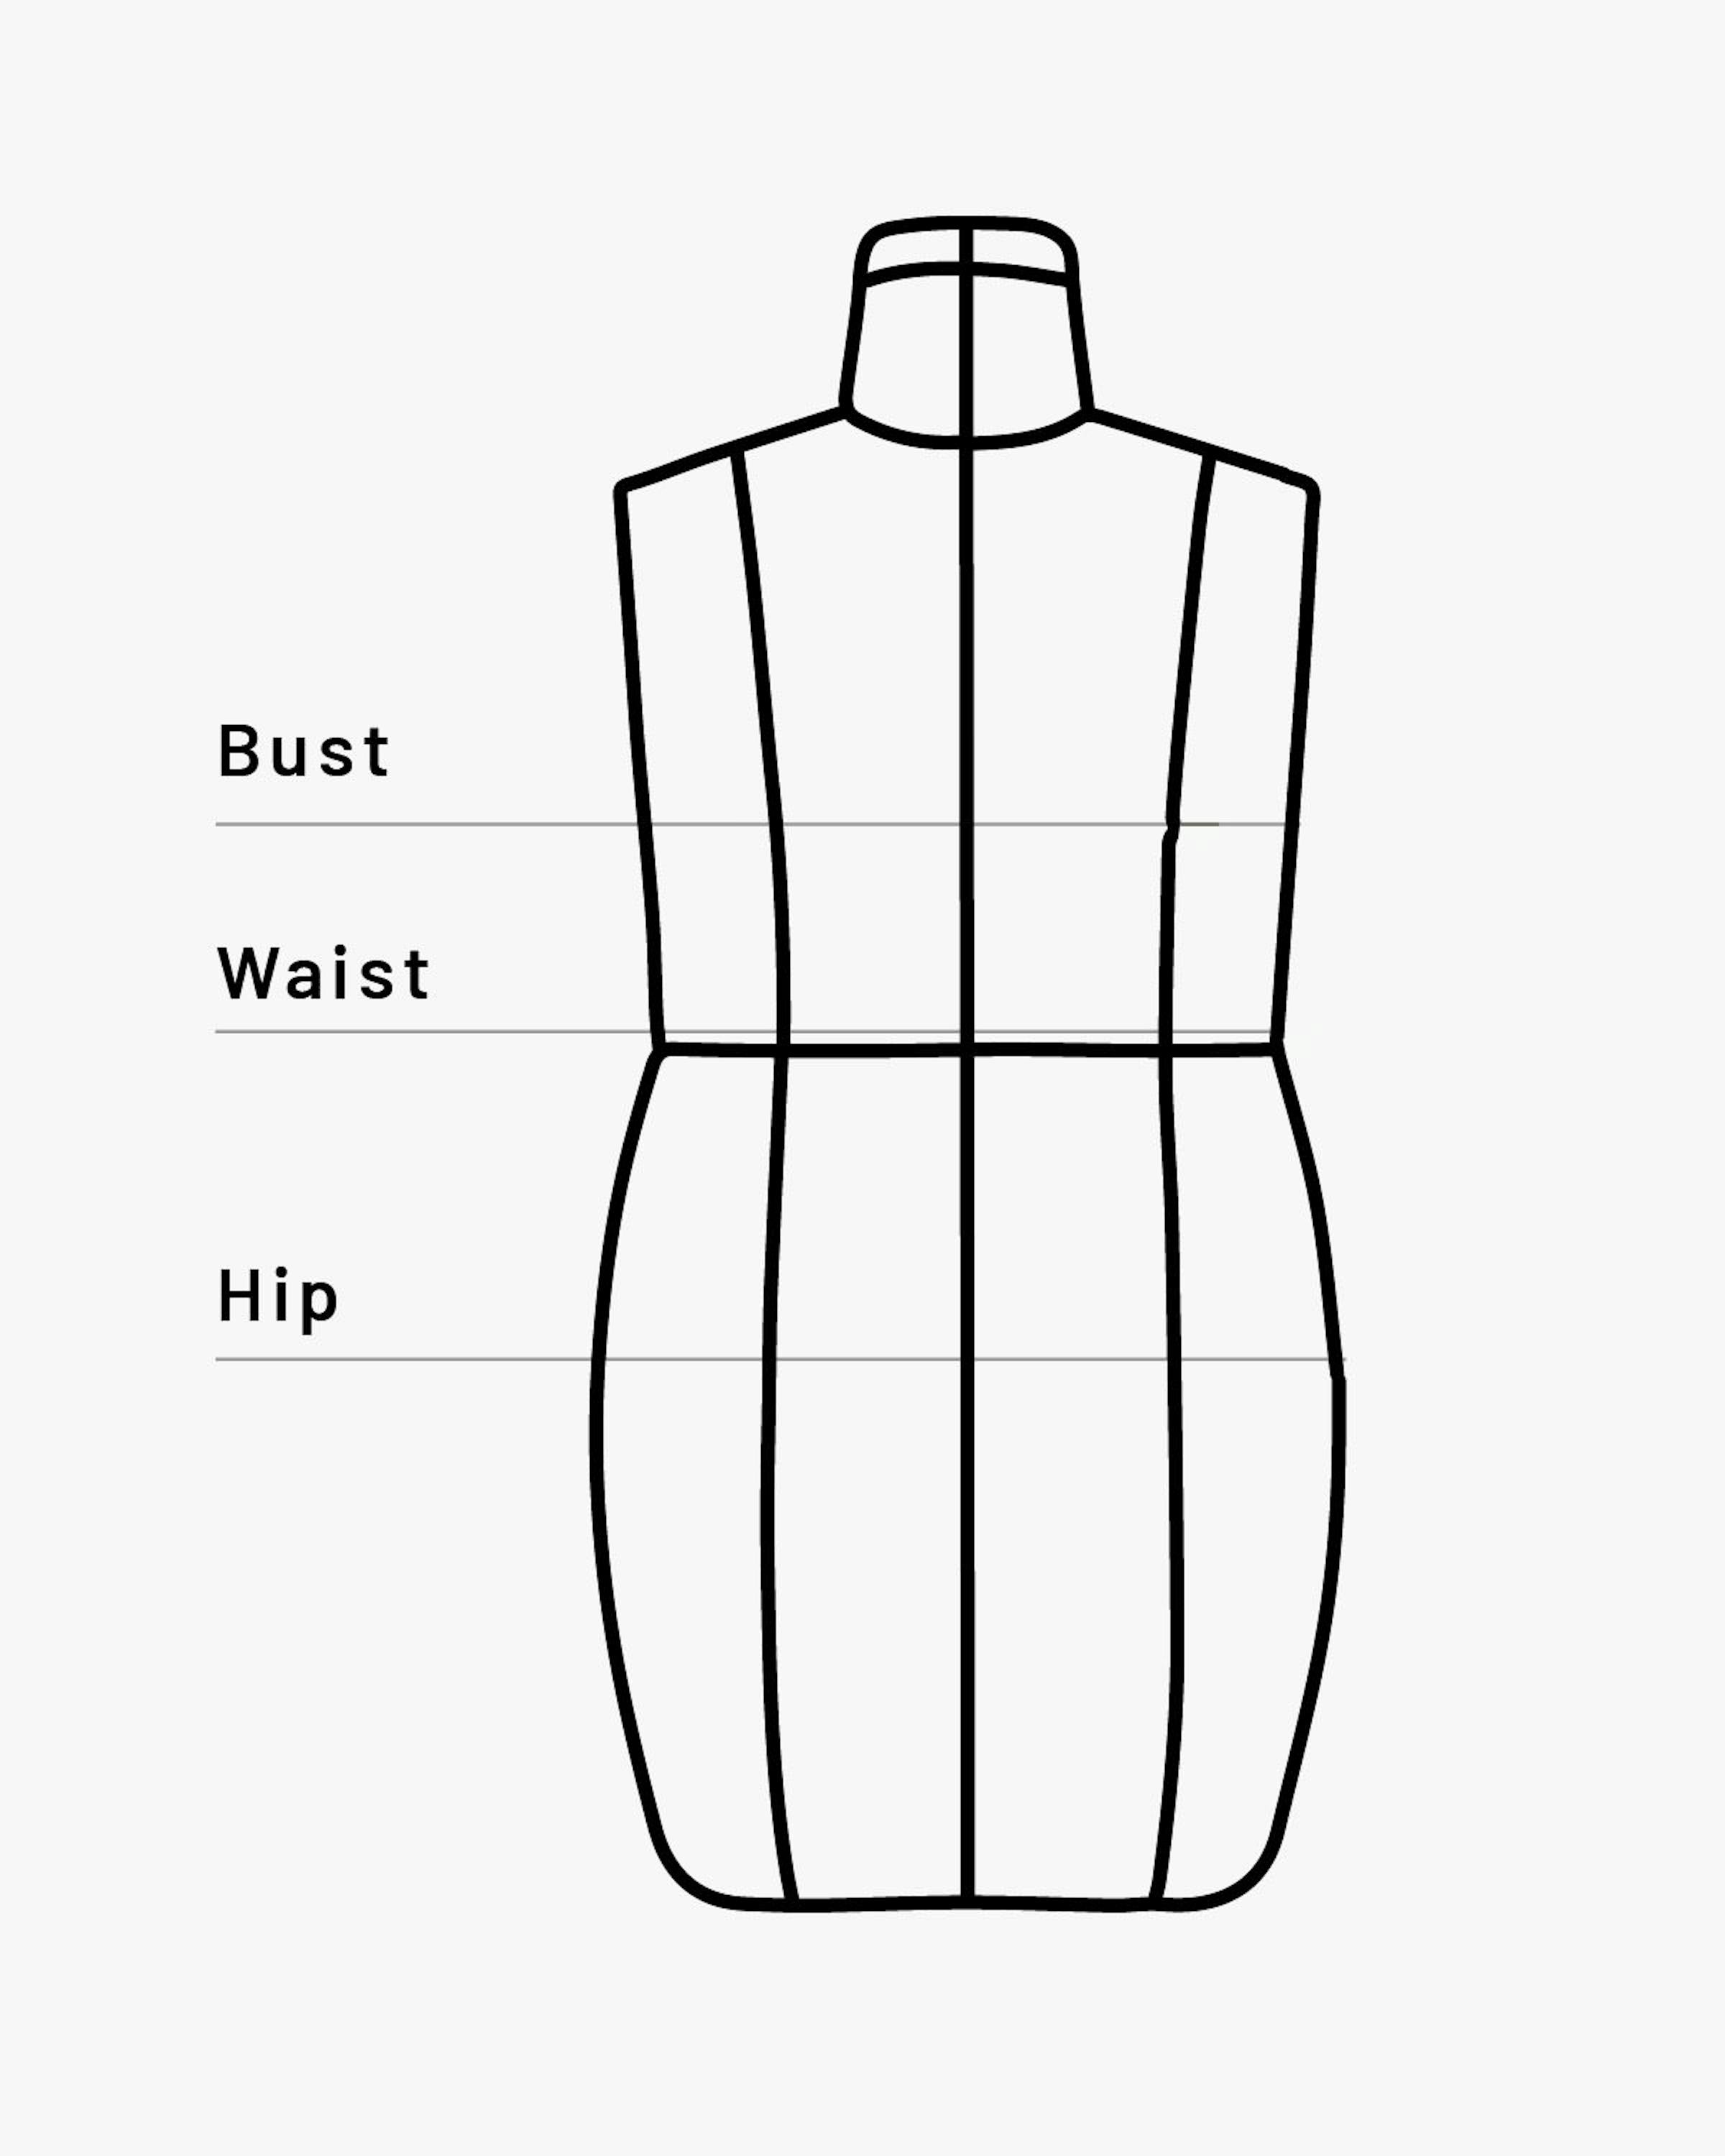 Illustration of a dress form with sizing areas highlighted